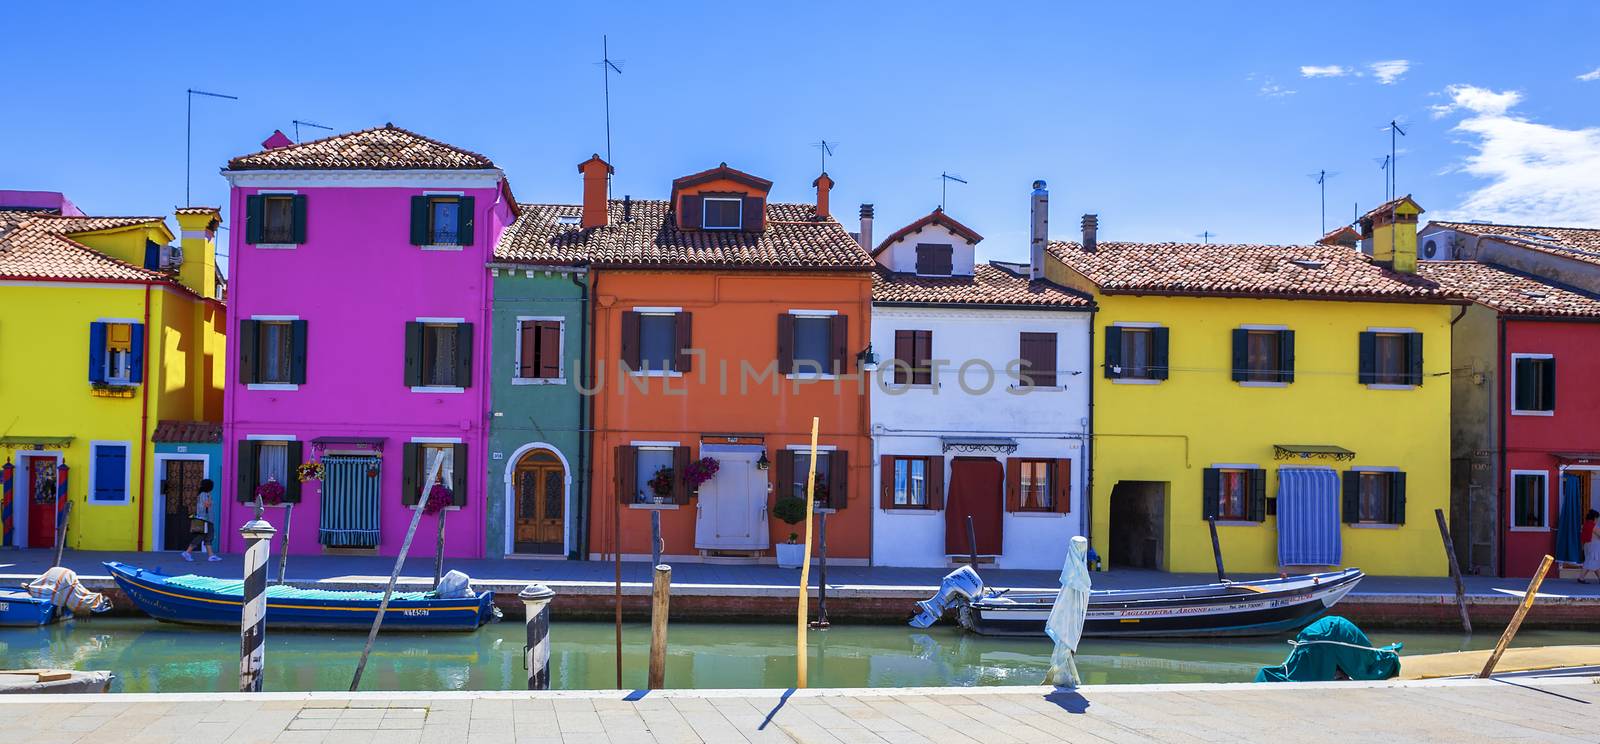 Colorful street with canal in Burano, near Venice, Italy 